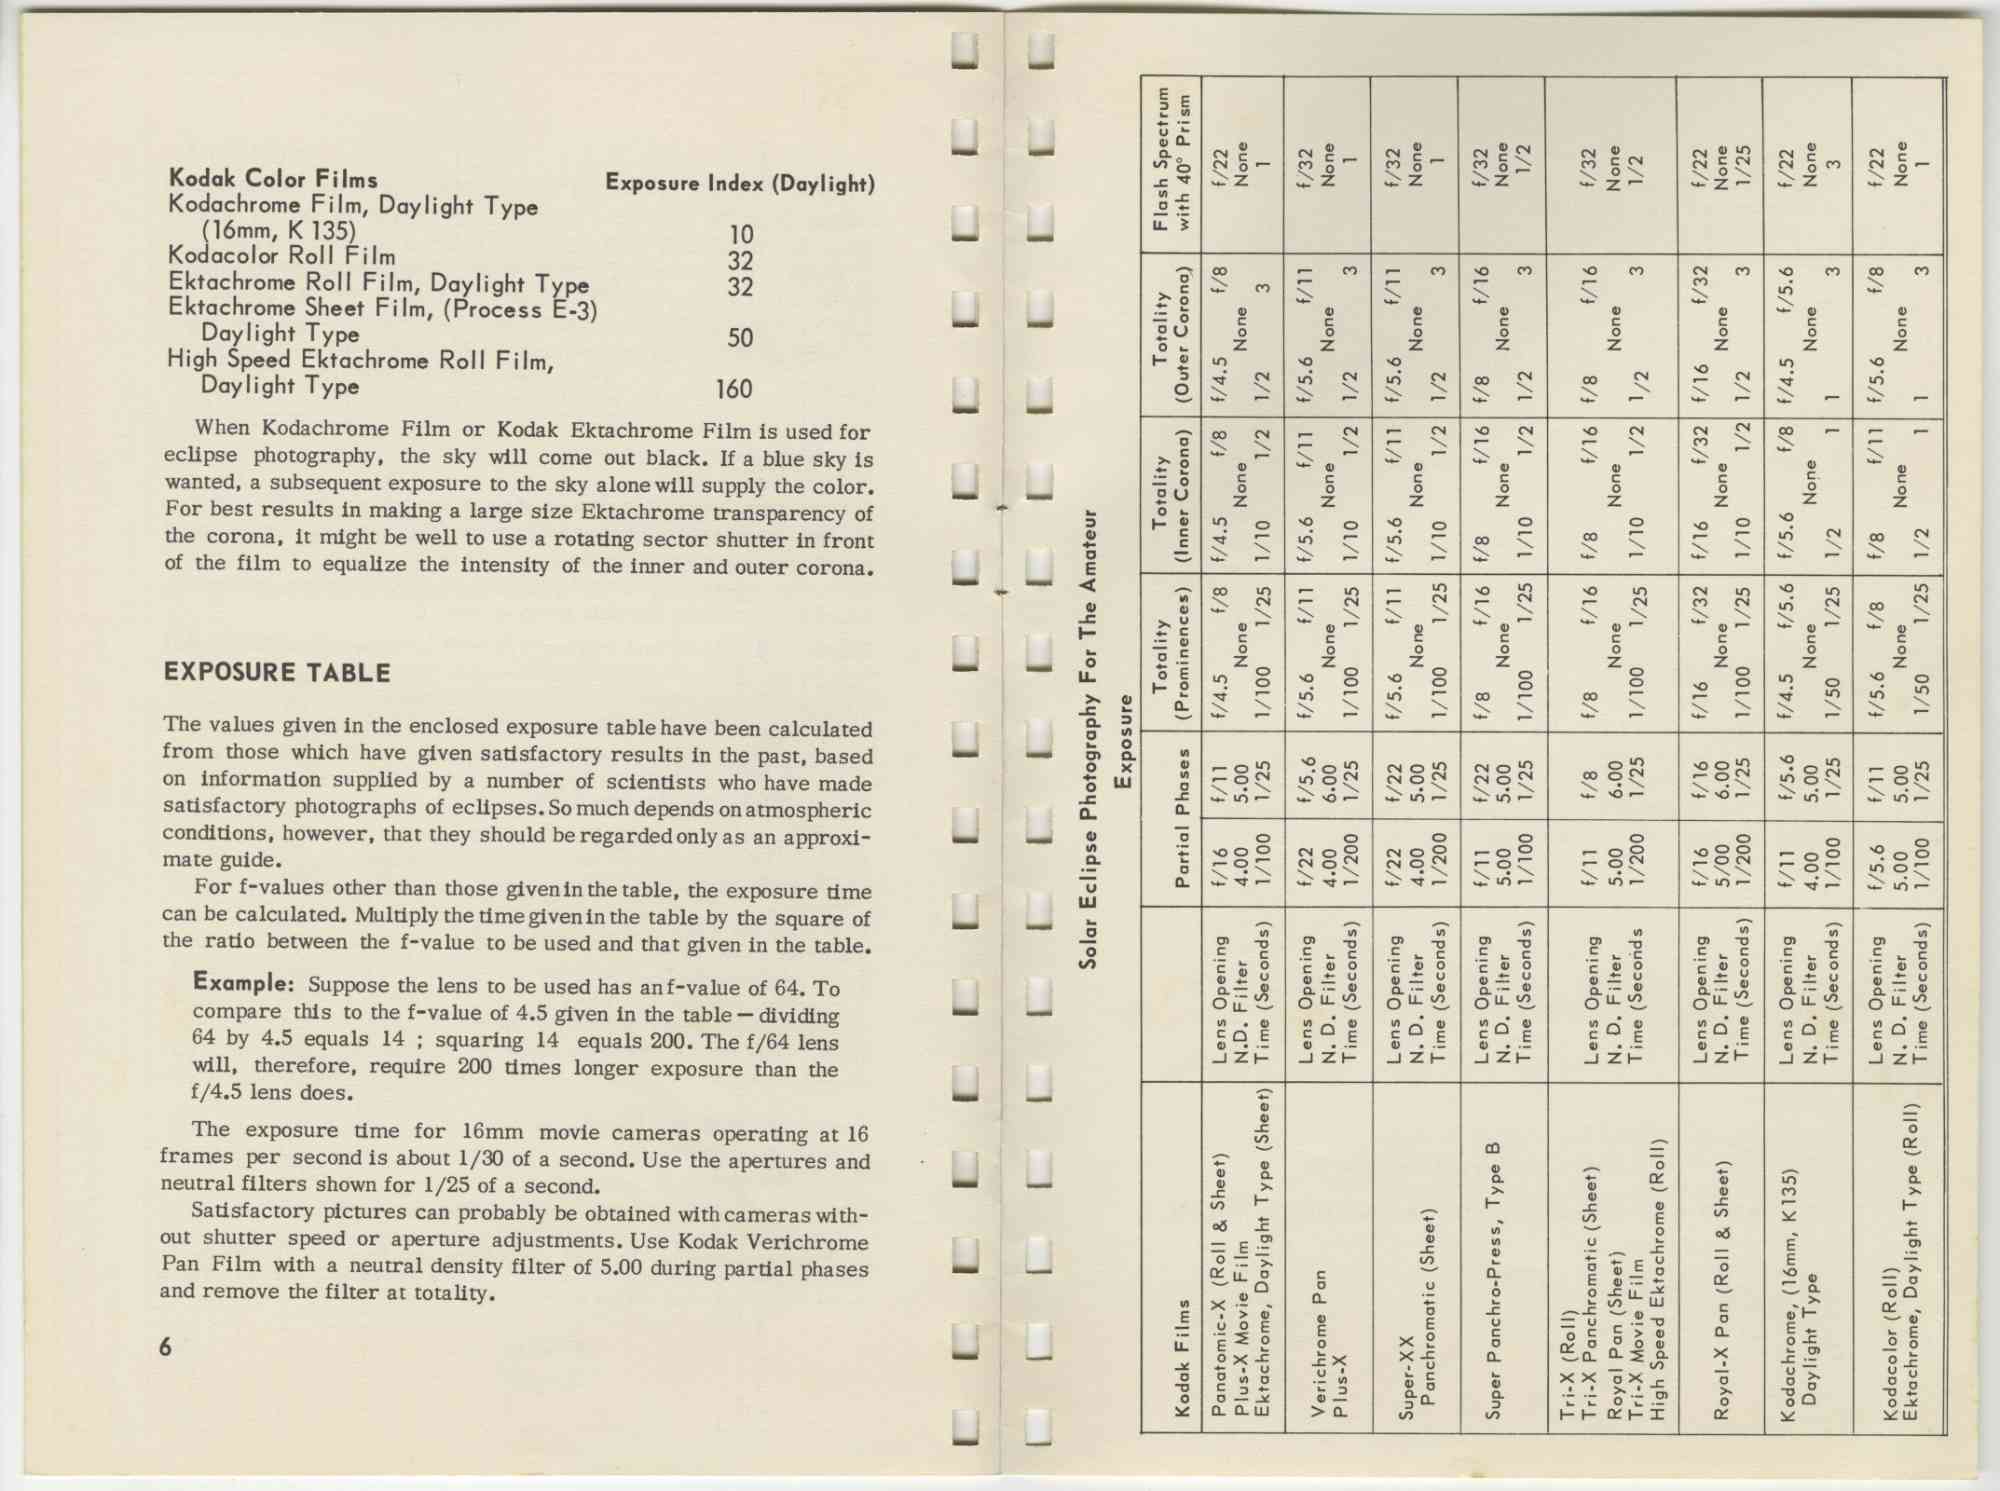 An interior solar eclipse photography guide produced by the Eastman Kodak Company provides an exposure table and explanations about exposure times.